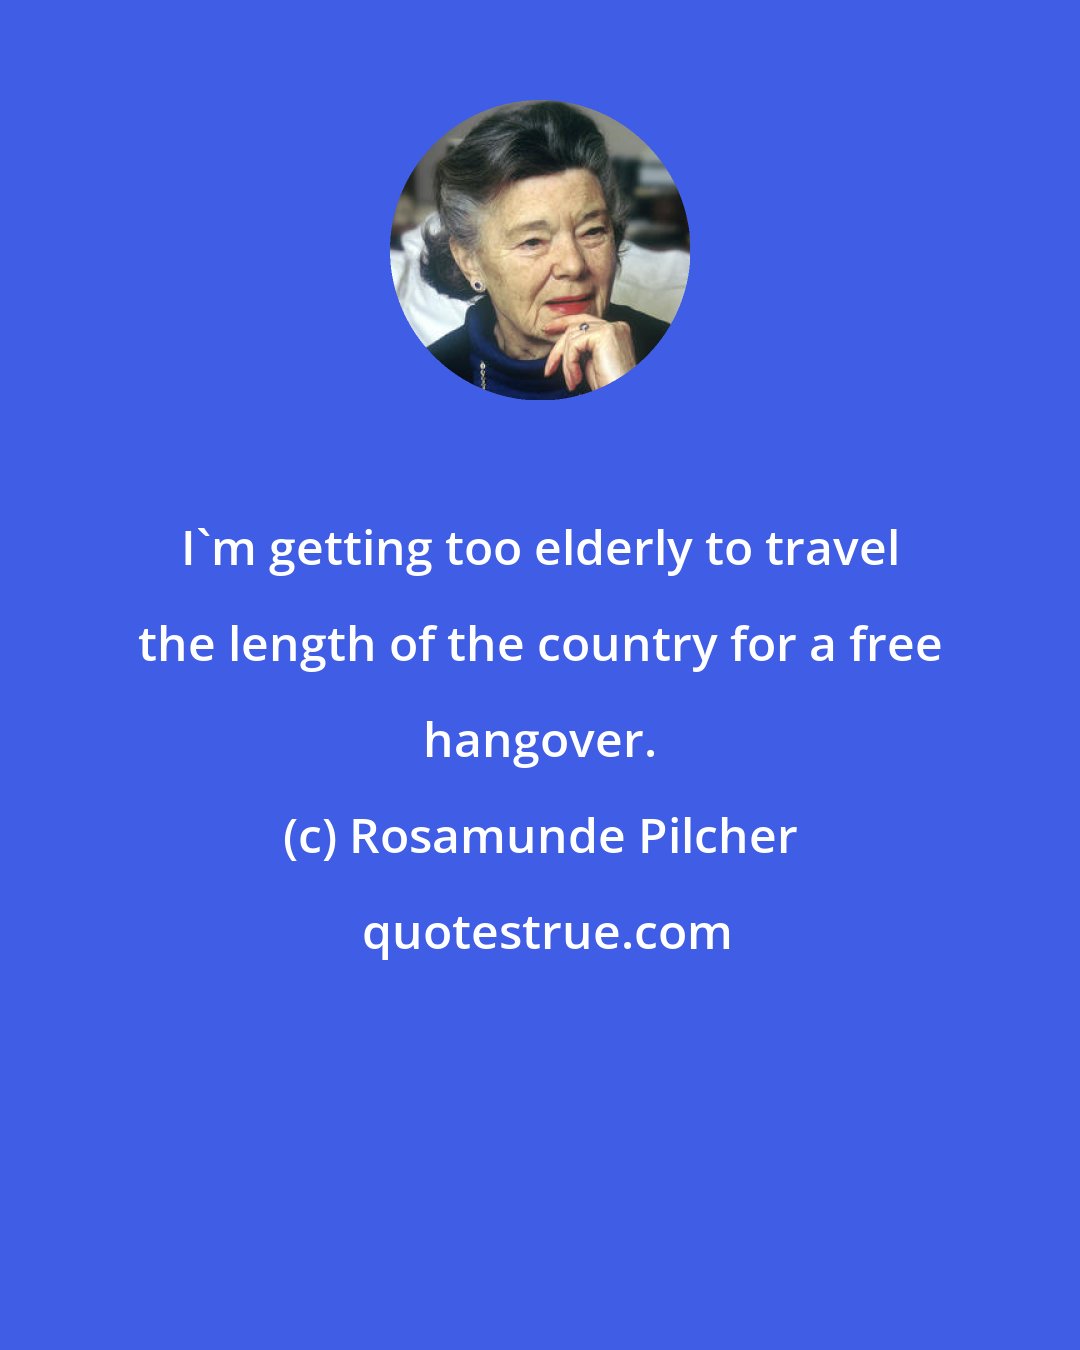 Rosamunde Pilcher: I'm getting too elderly to travel the length of the country for a free hangover.